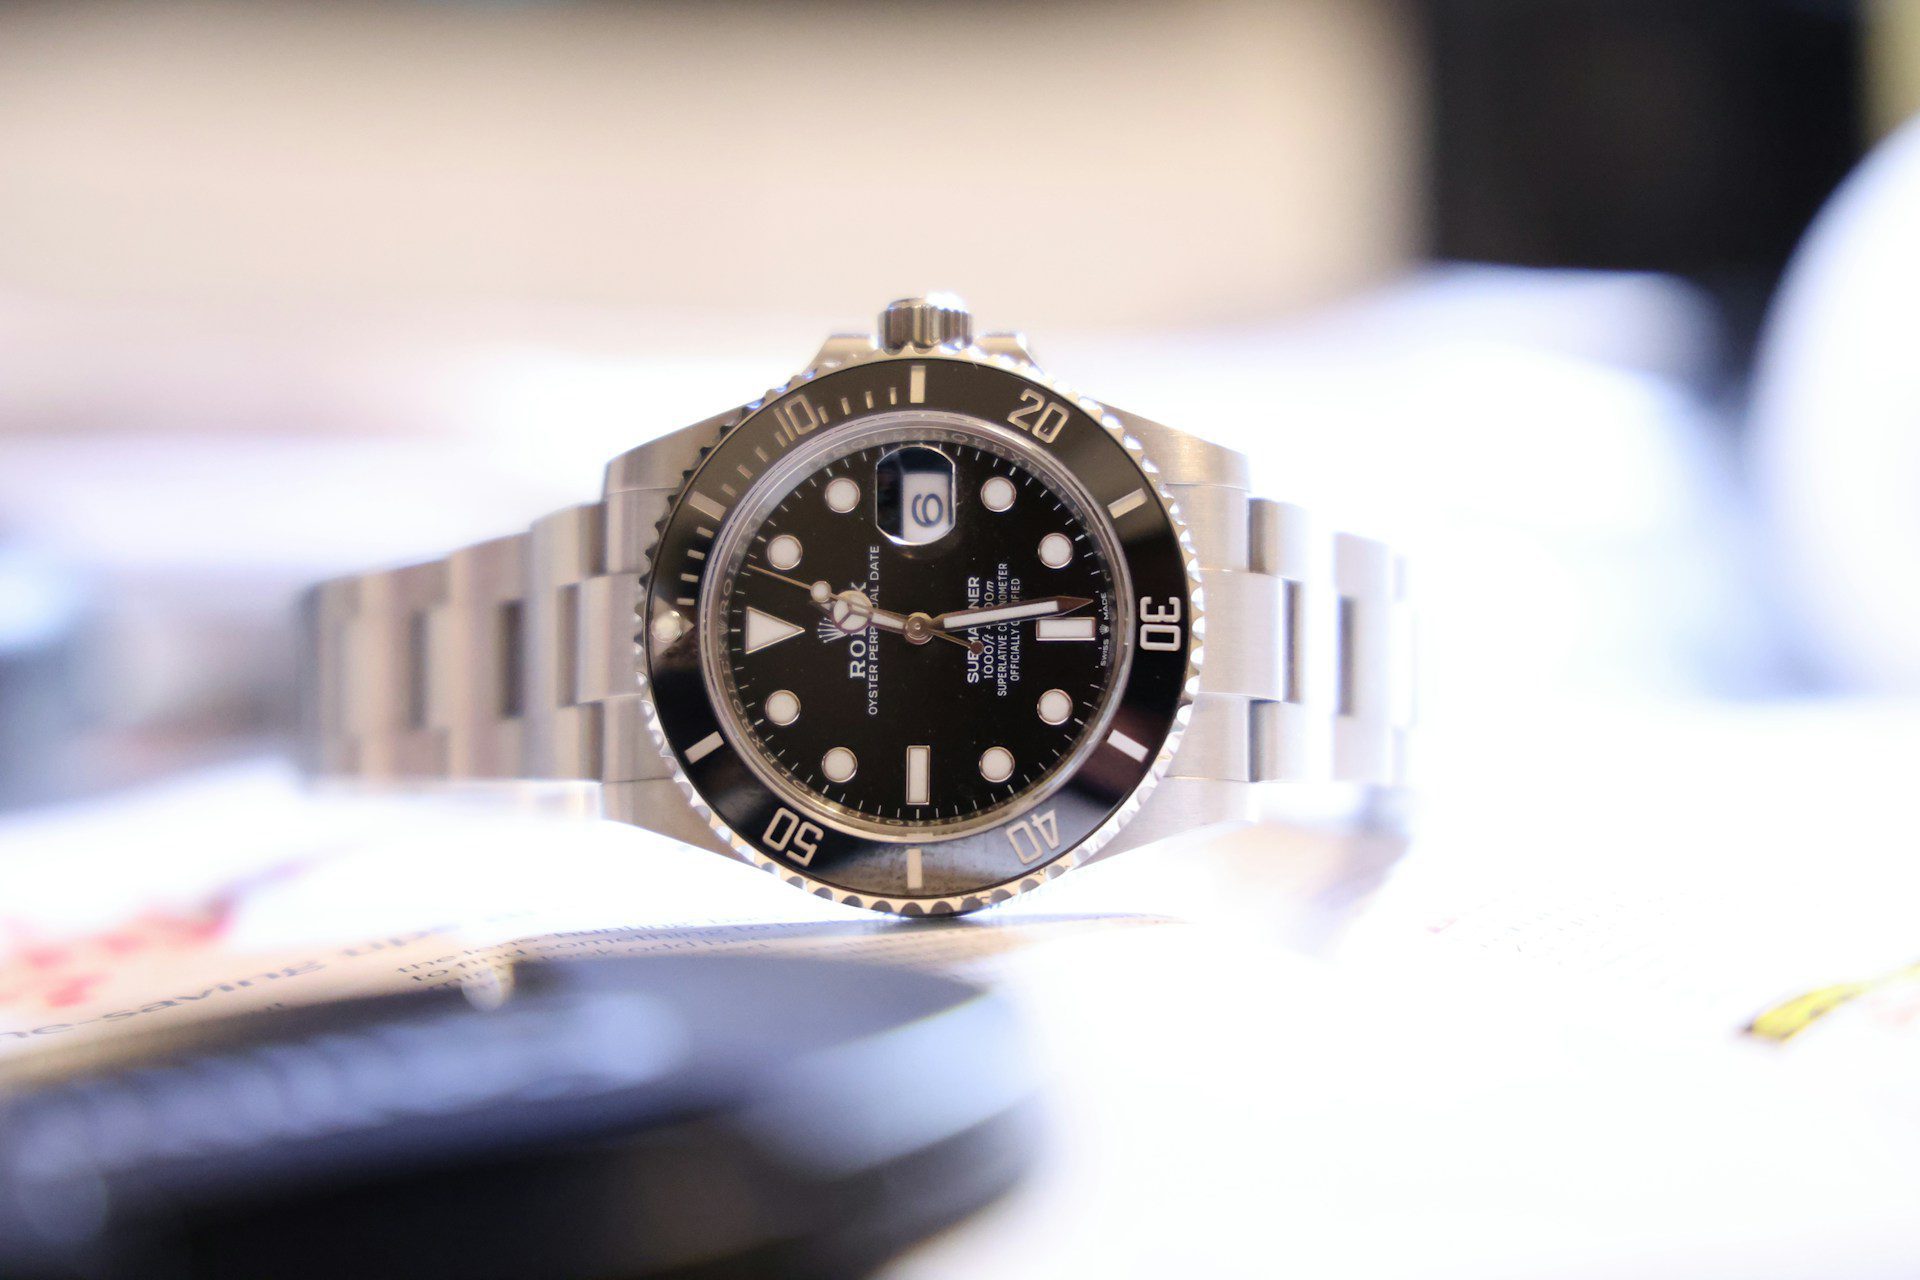 What to Look for When Buying a Certified Pre-Owned Rolex